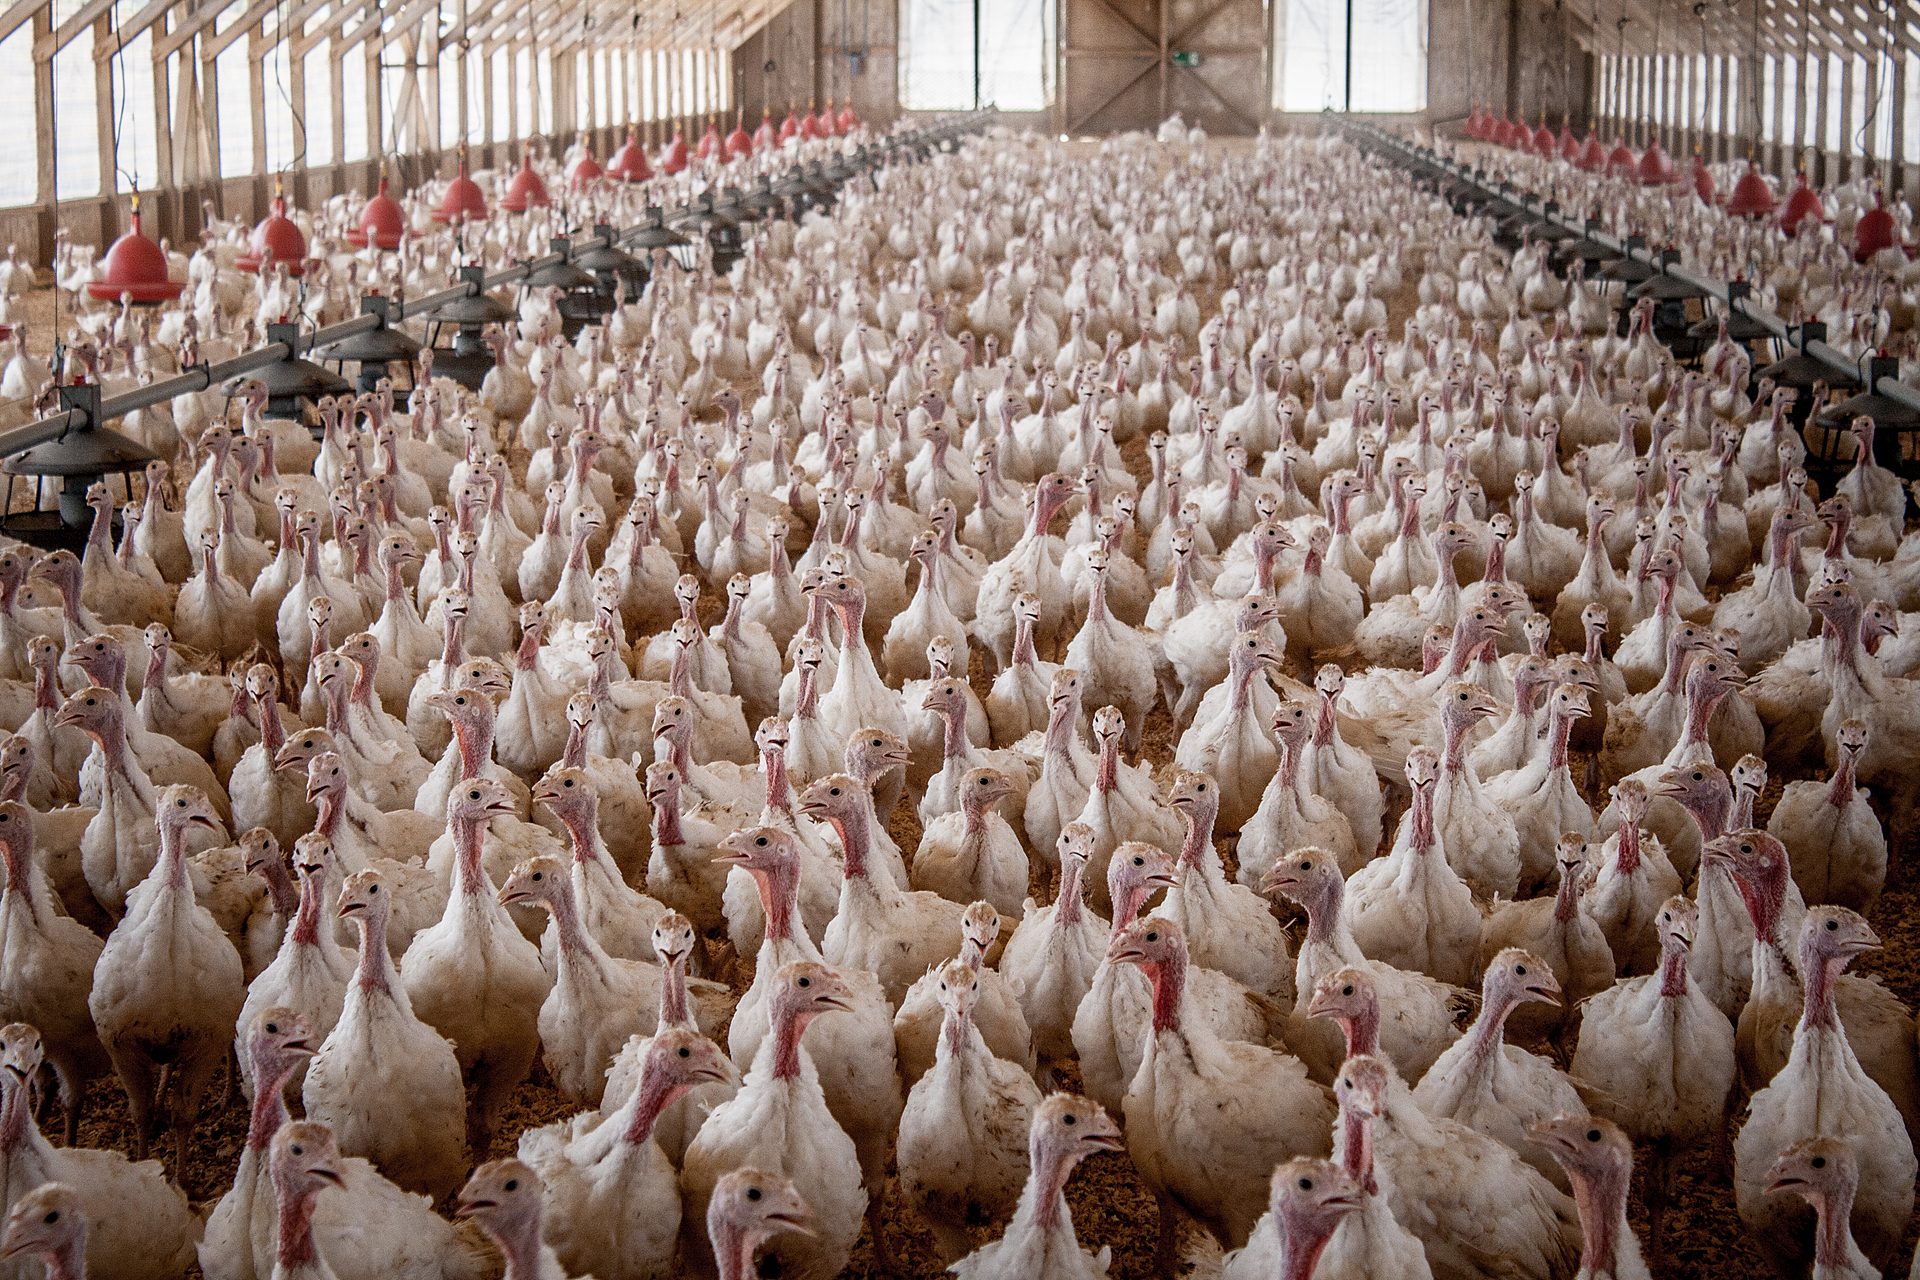 Turkeys close to slaughter age are crowded into a shed with little room to move at a feedlot in Chile.